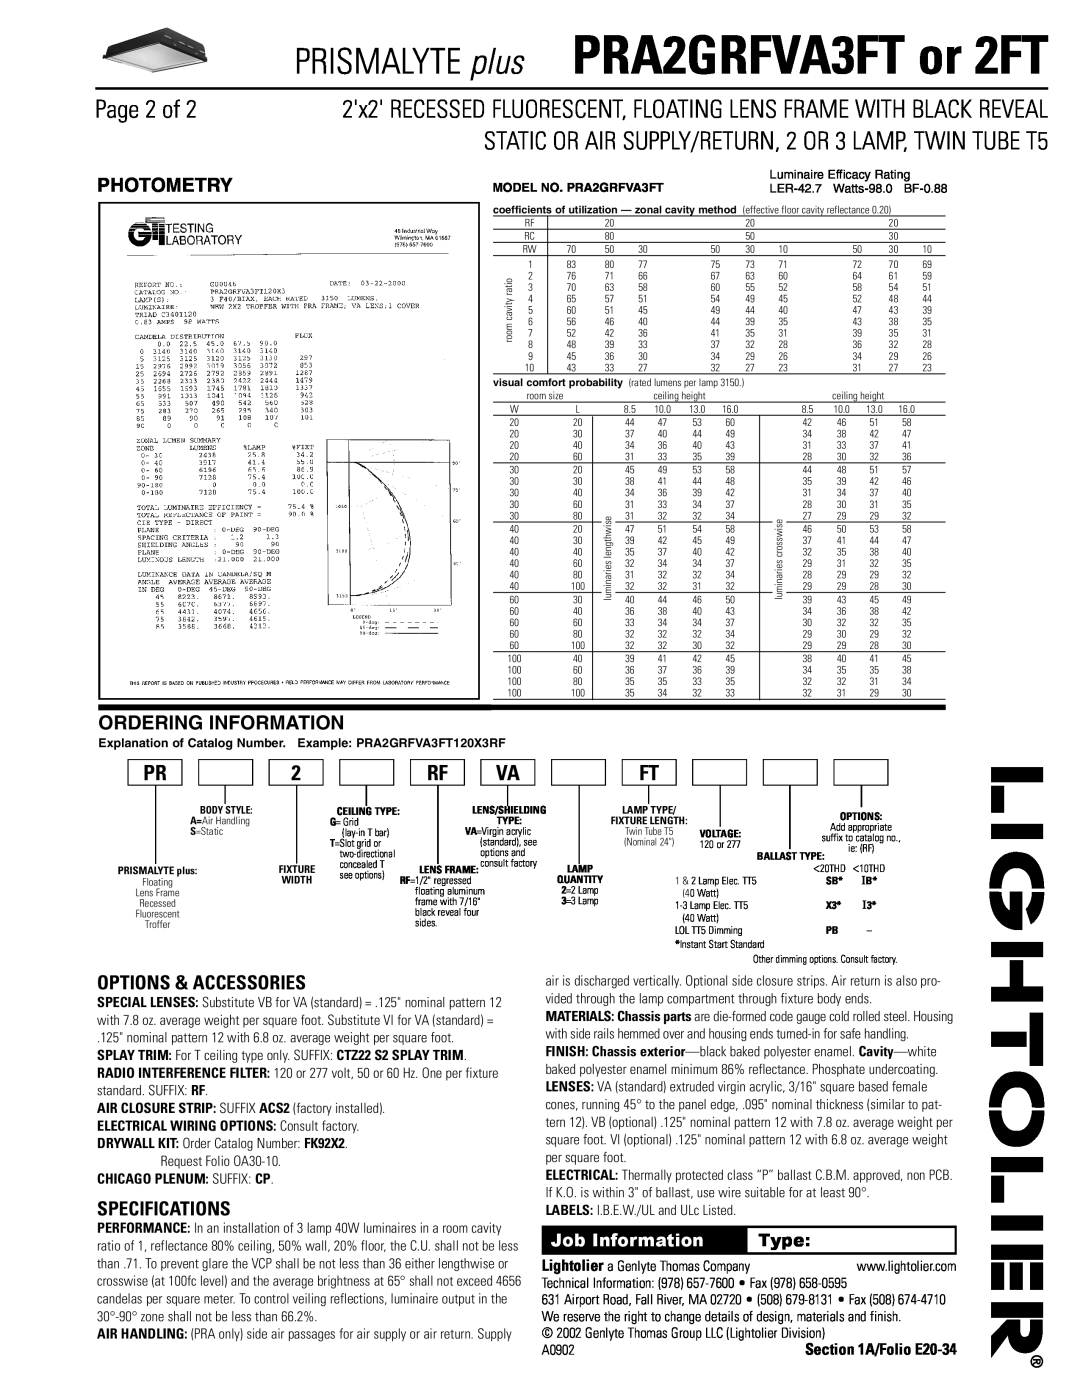 Lightolier PRA2GRFVA3FT dimensions Page 2 of, Photometry, Ordering Information, Options & Accessories, Specifications, Type 